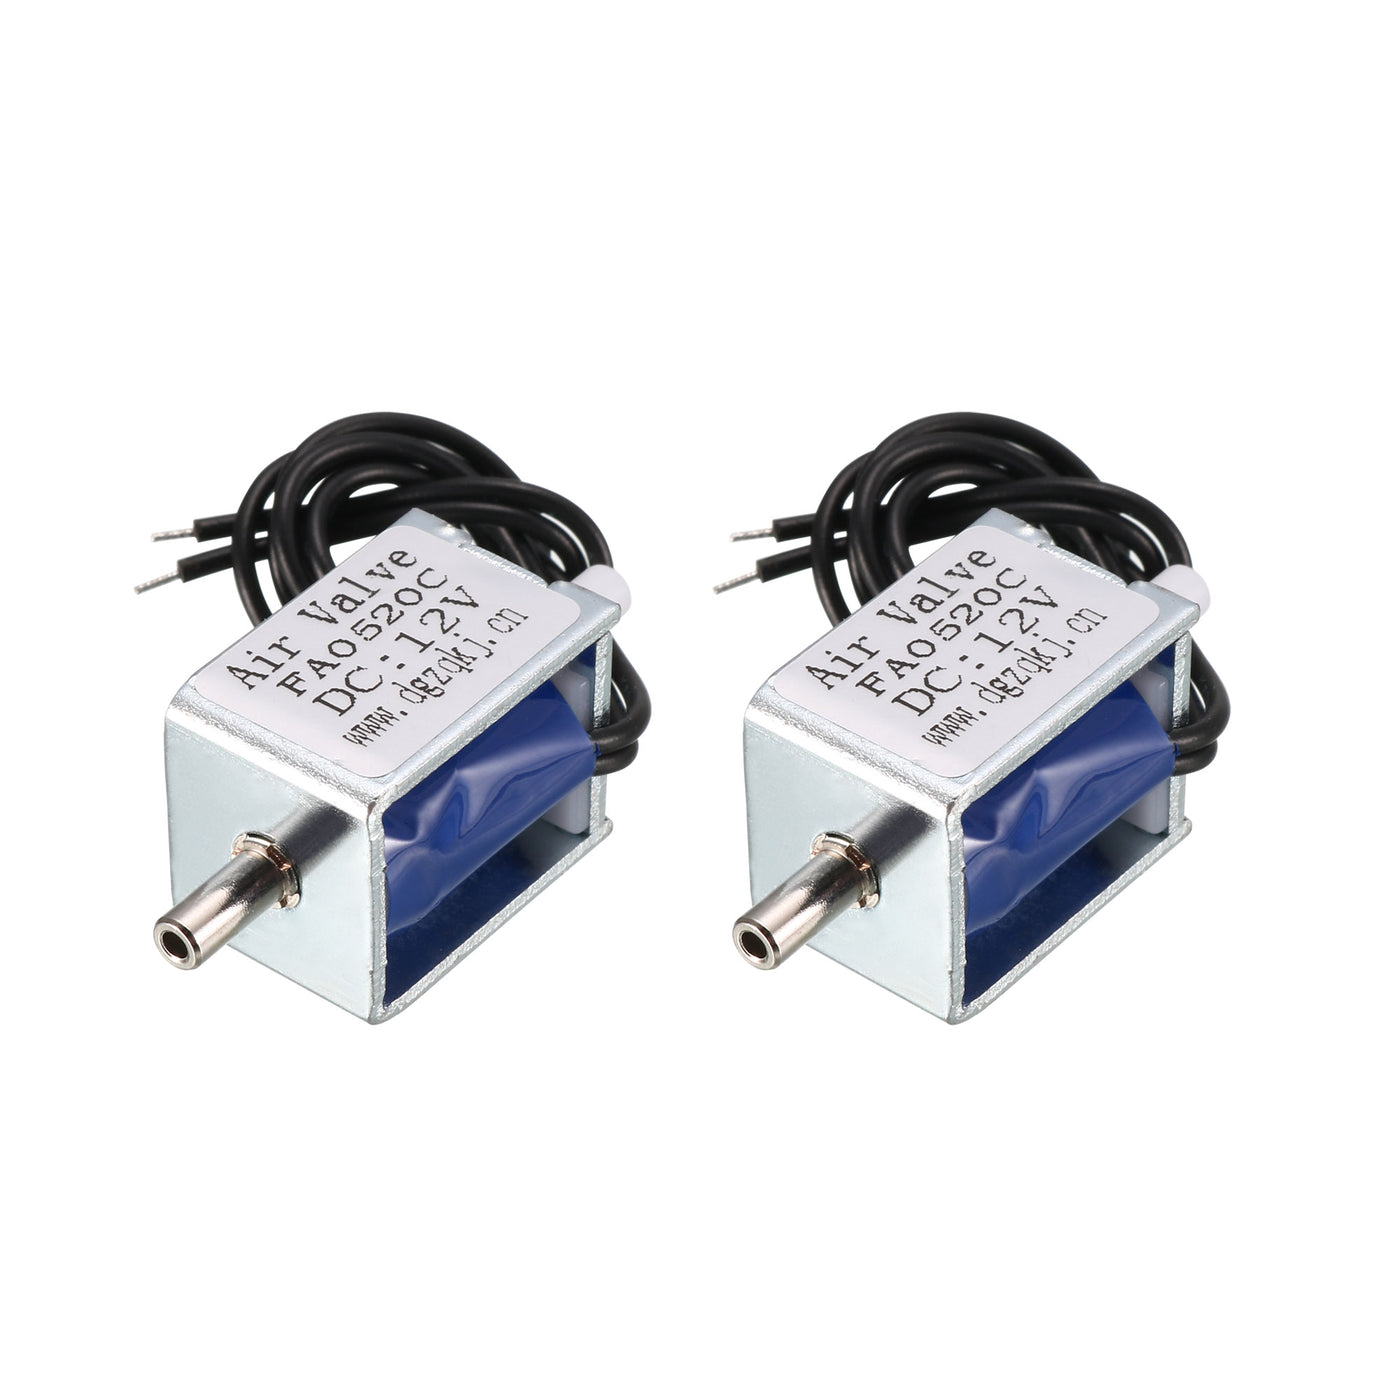 uxcell Uxcell Miniature Solenoid Valve 2 Way Normally Opened DC12V 45mA Air Solenoid Valve, 2pcs